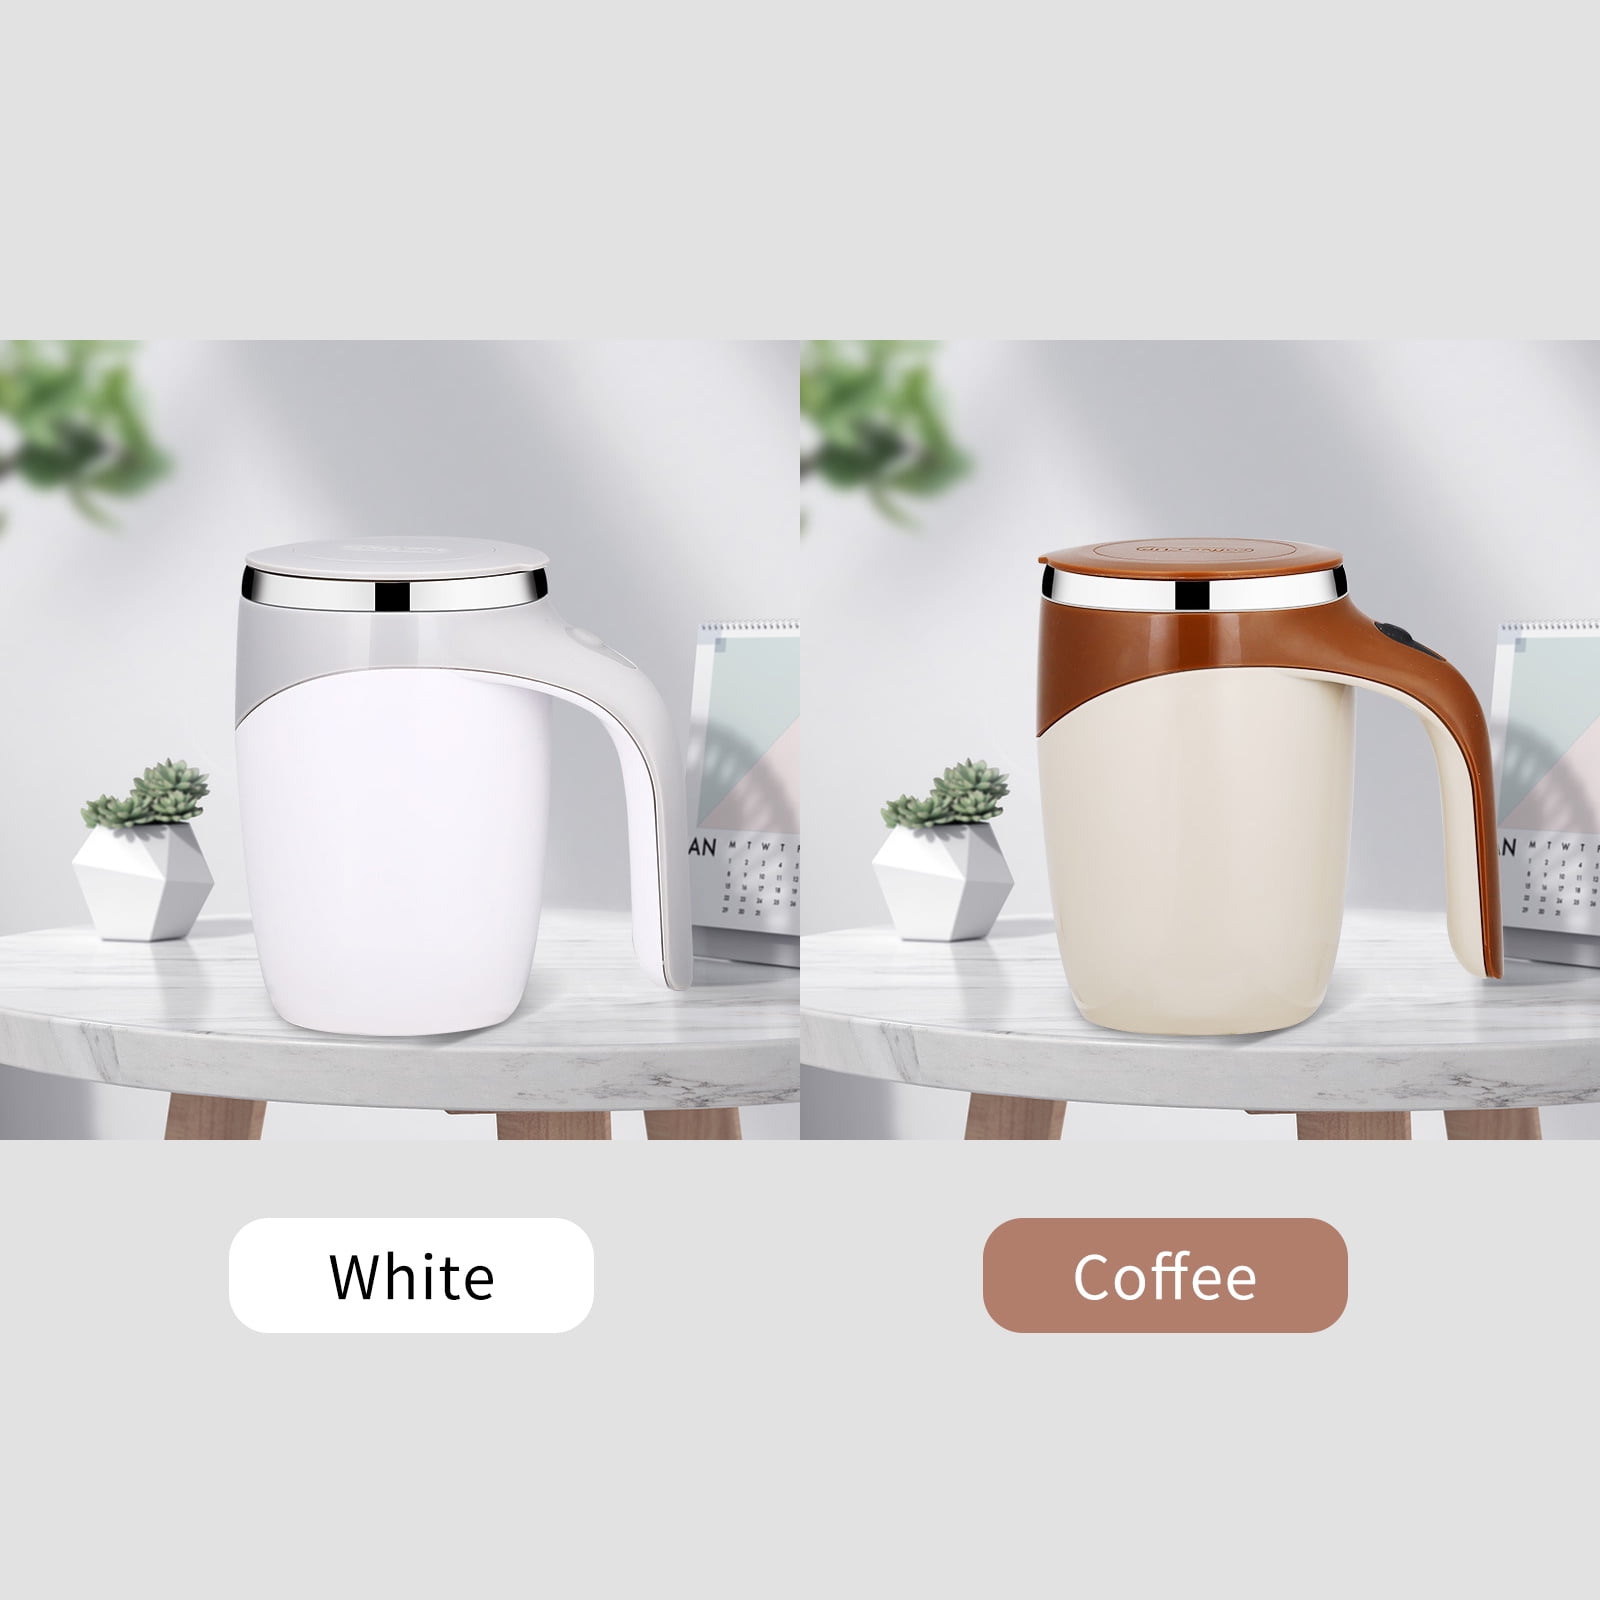 Toorise 380ml Self Stirring Mug Rechargeable Auto Magnetic Coffee Mug with Stir Bar Electric Stainless Steel Self Mixing Coffee Cup Suitable for Home